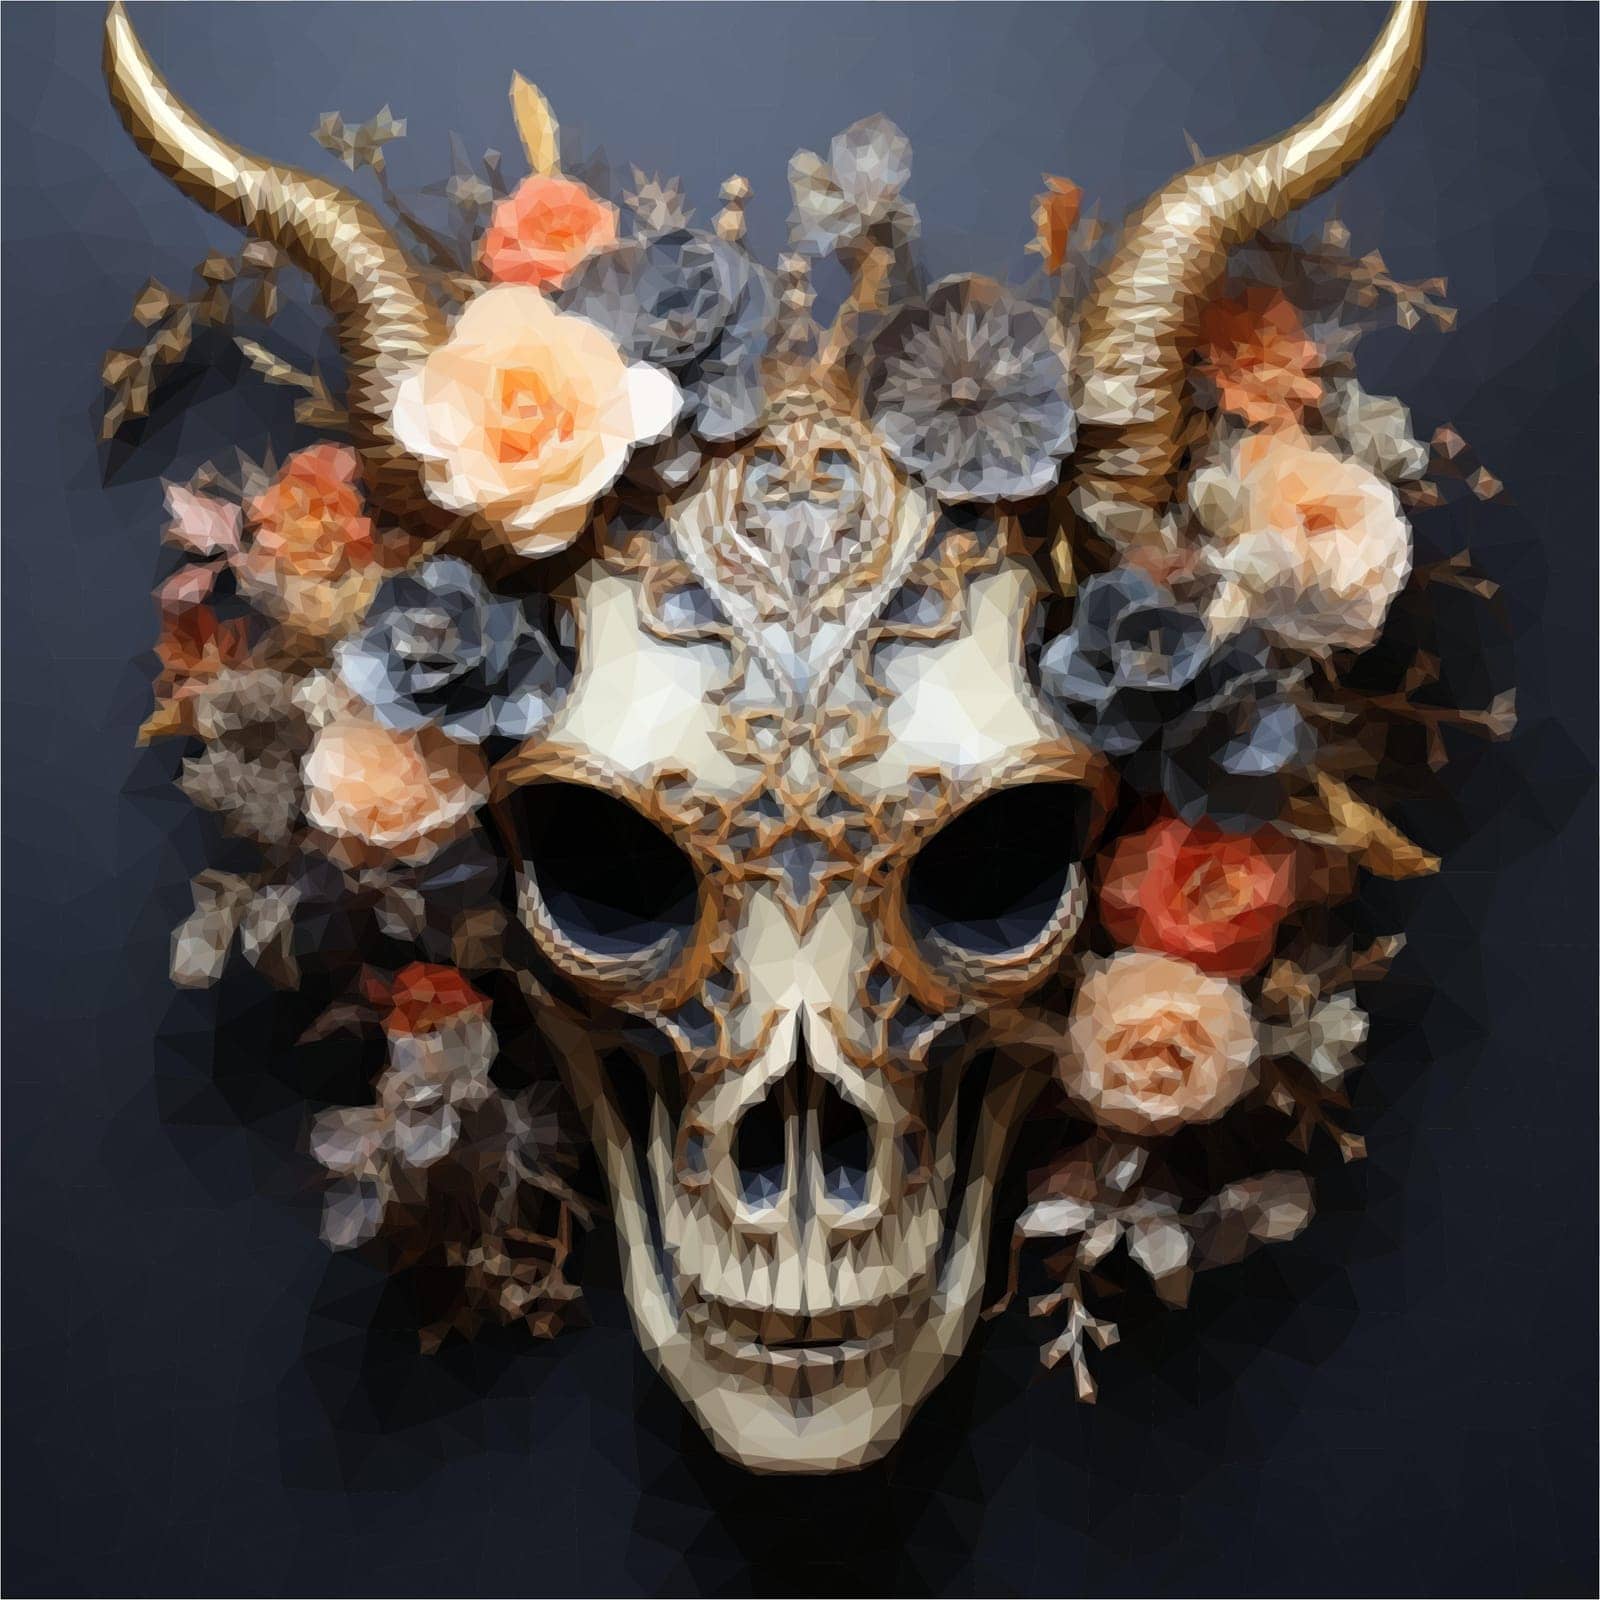 Goat skull decorated with flowers by ekaterinabyuksel